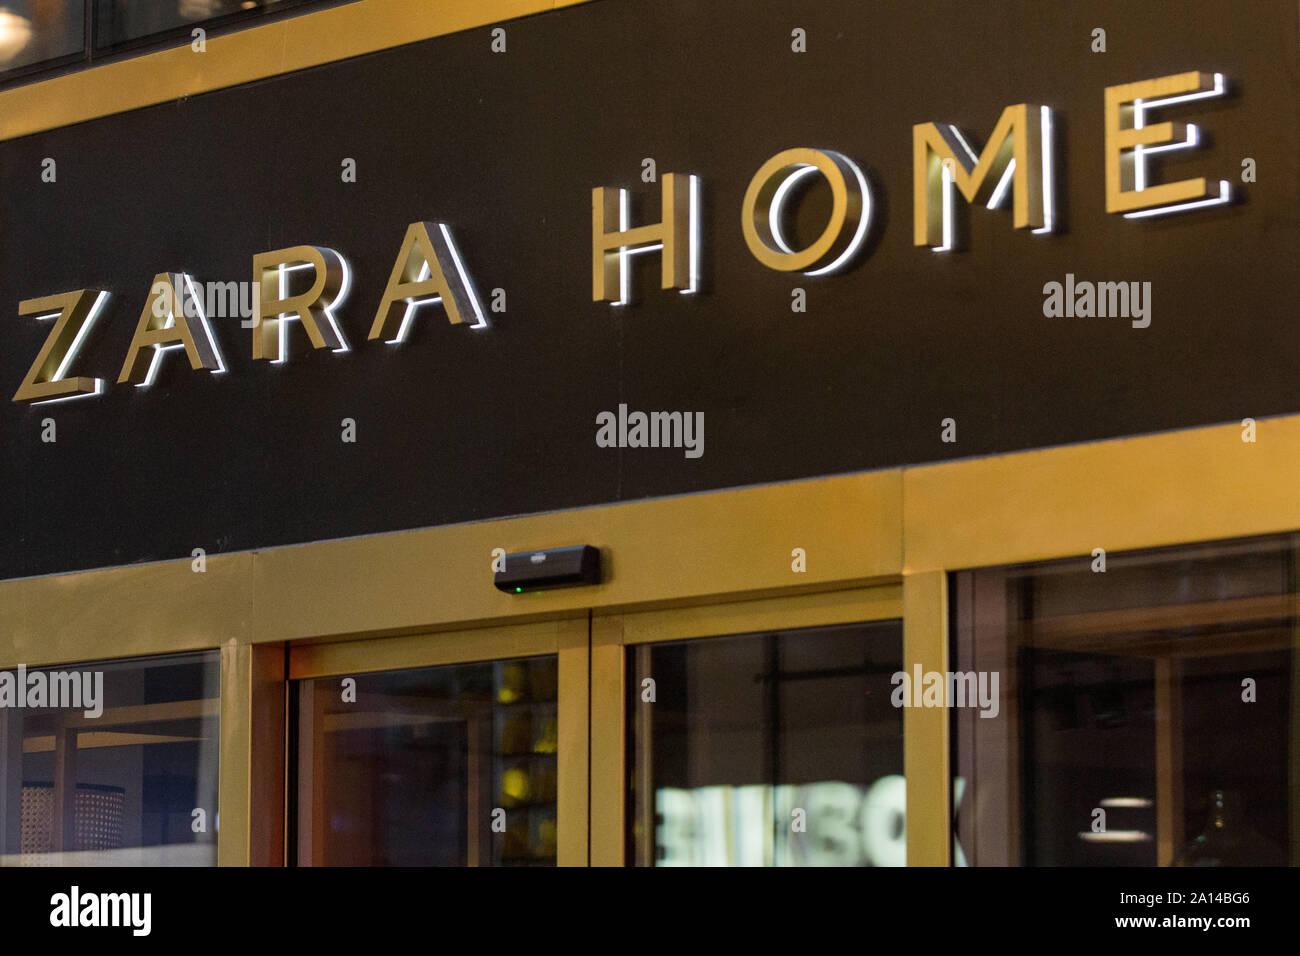 Page 2 - Zara Home Shop High Resolution Stock Photography and Images - Alamy